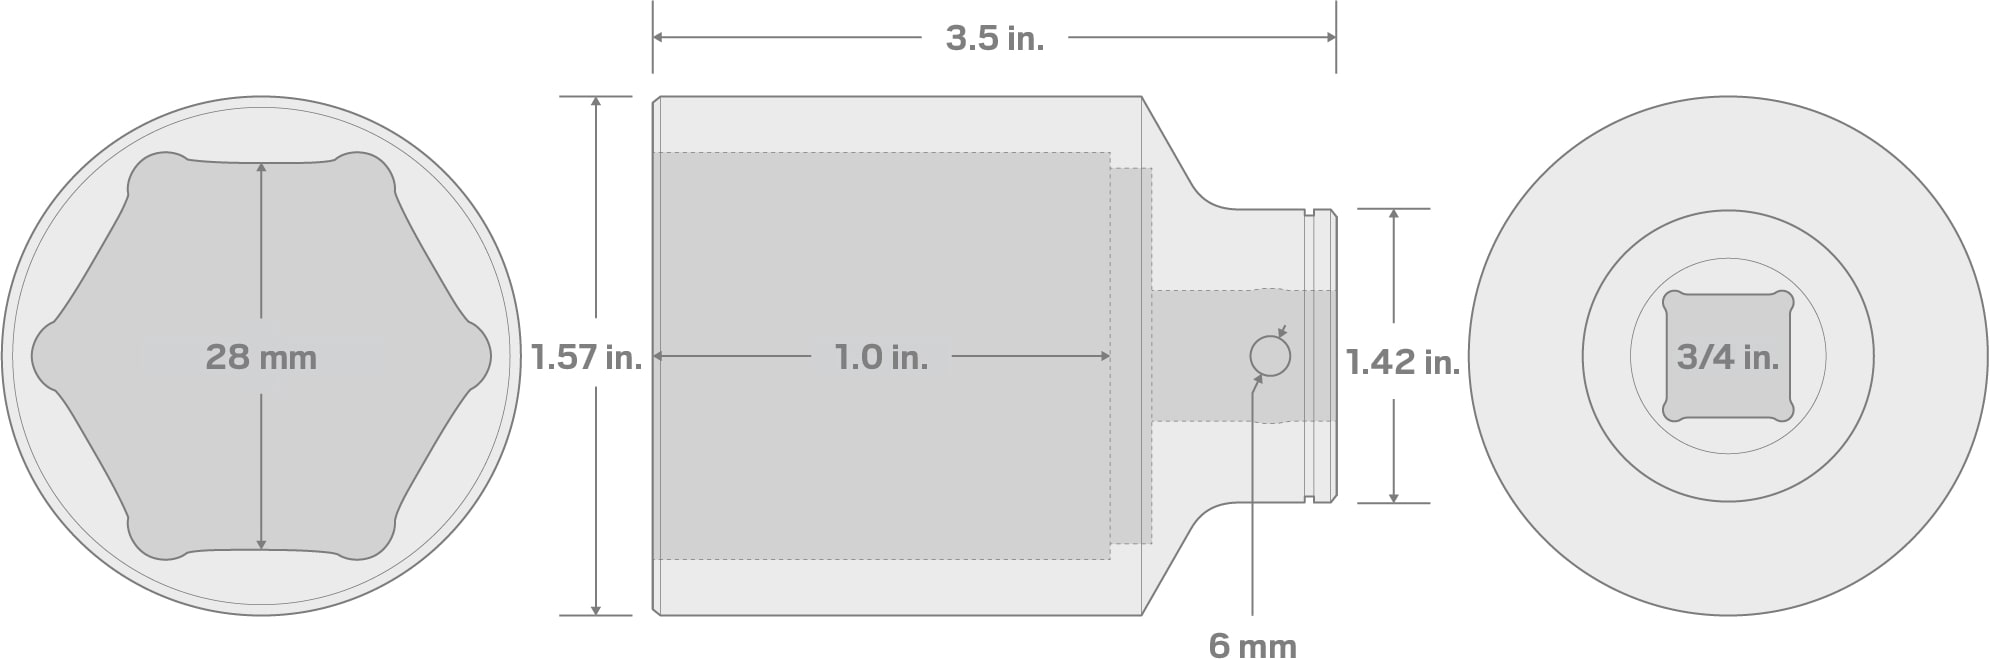 Specs for 3/4 Inch Drive x 28 mm Deep 6-Point Socket